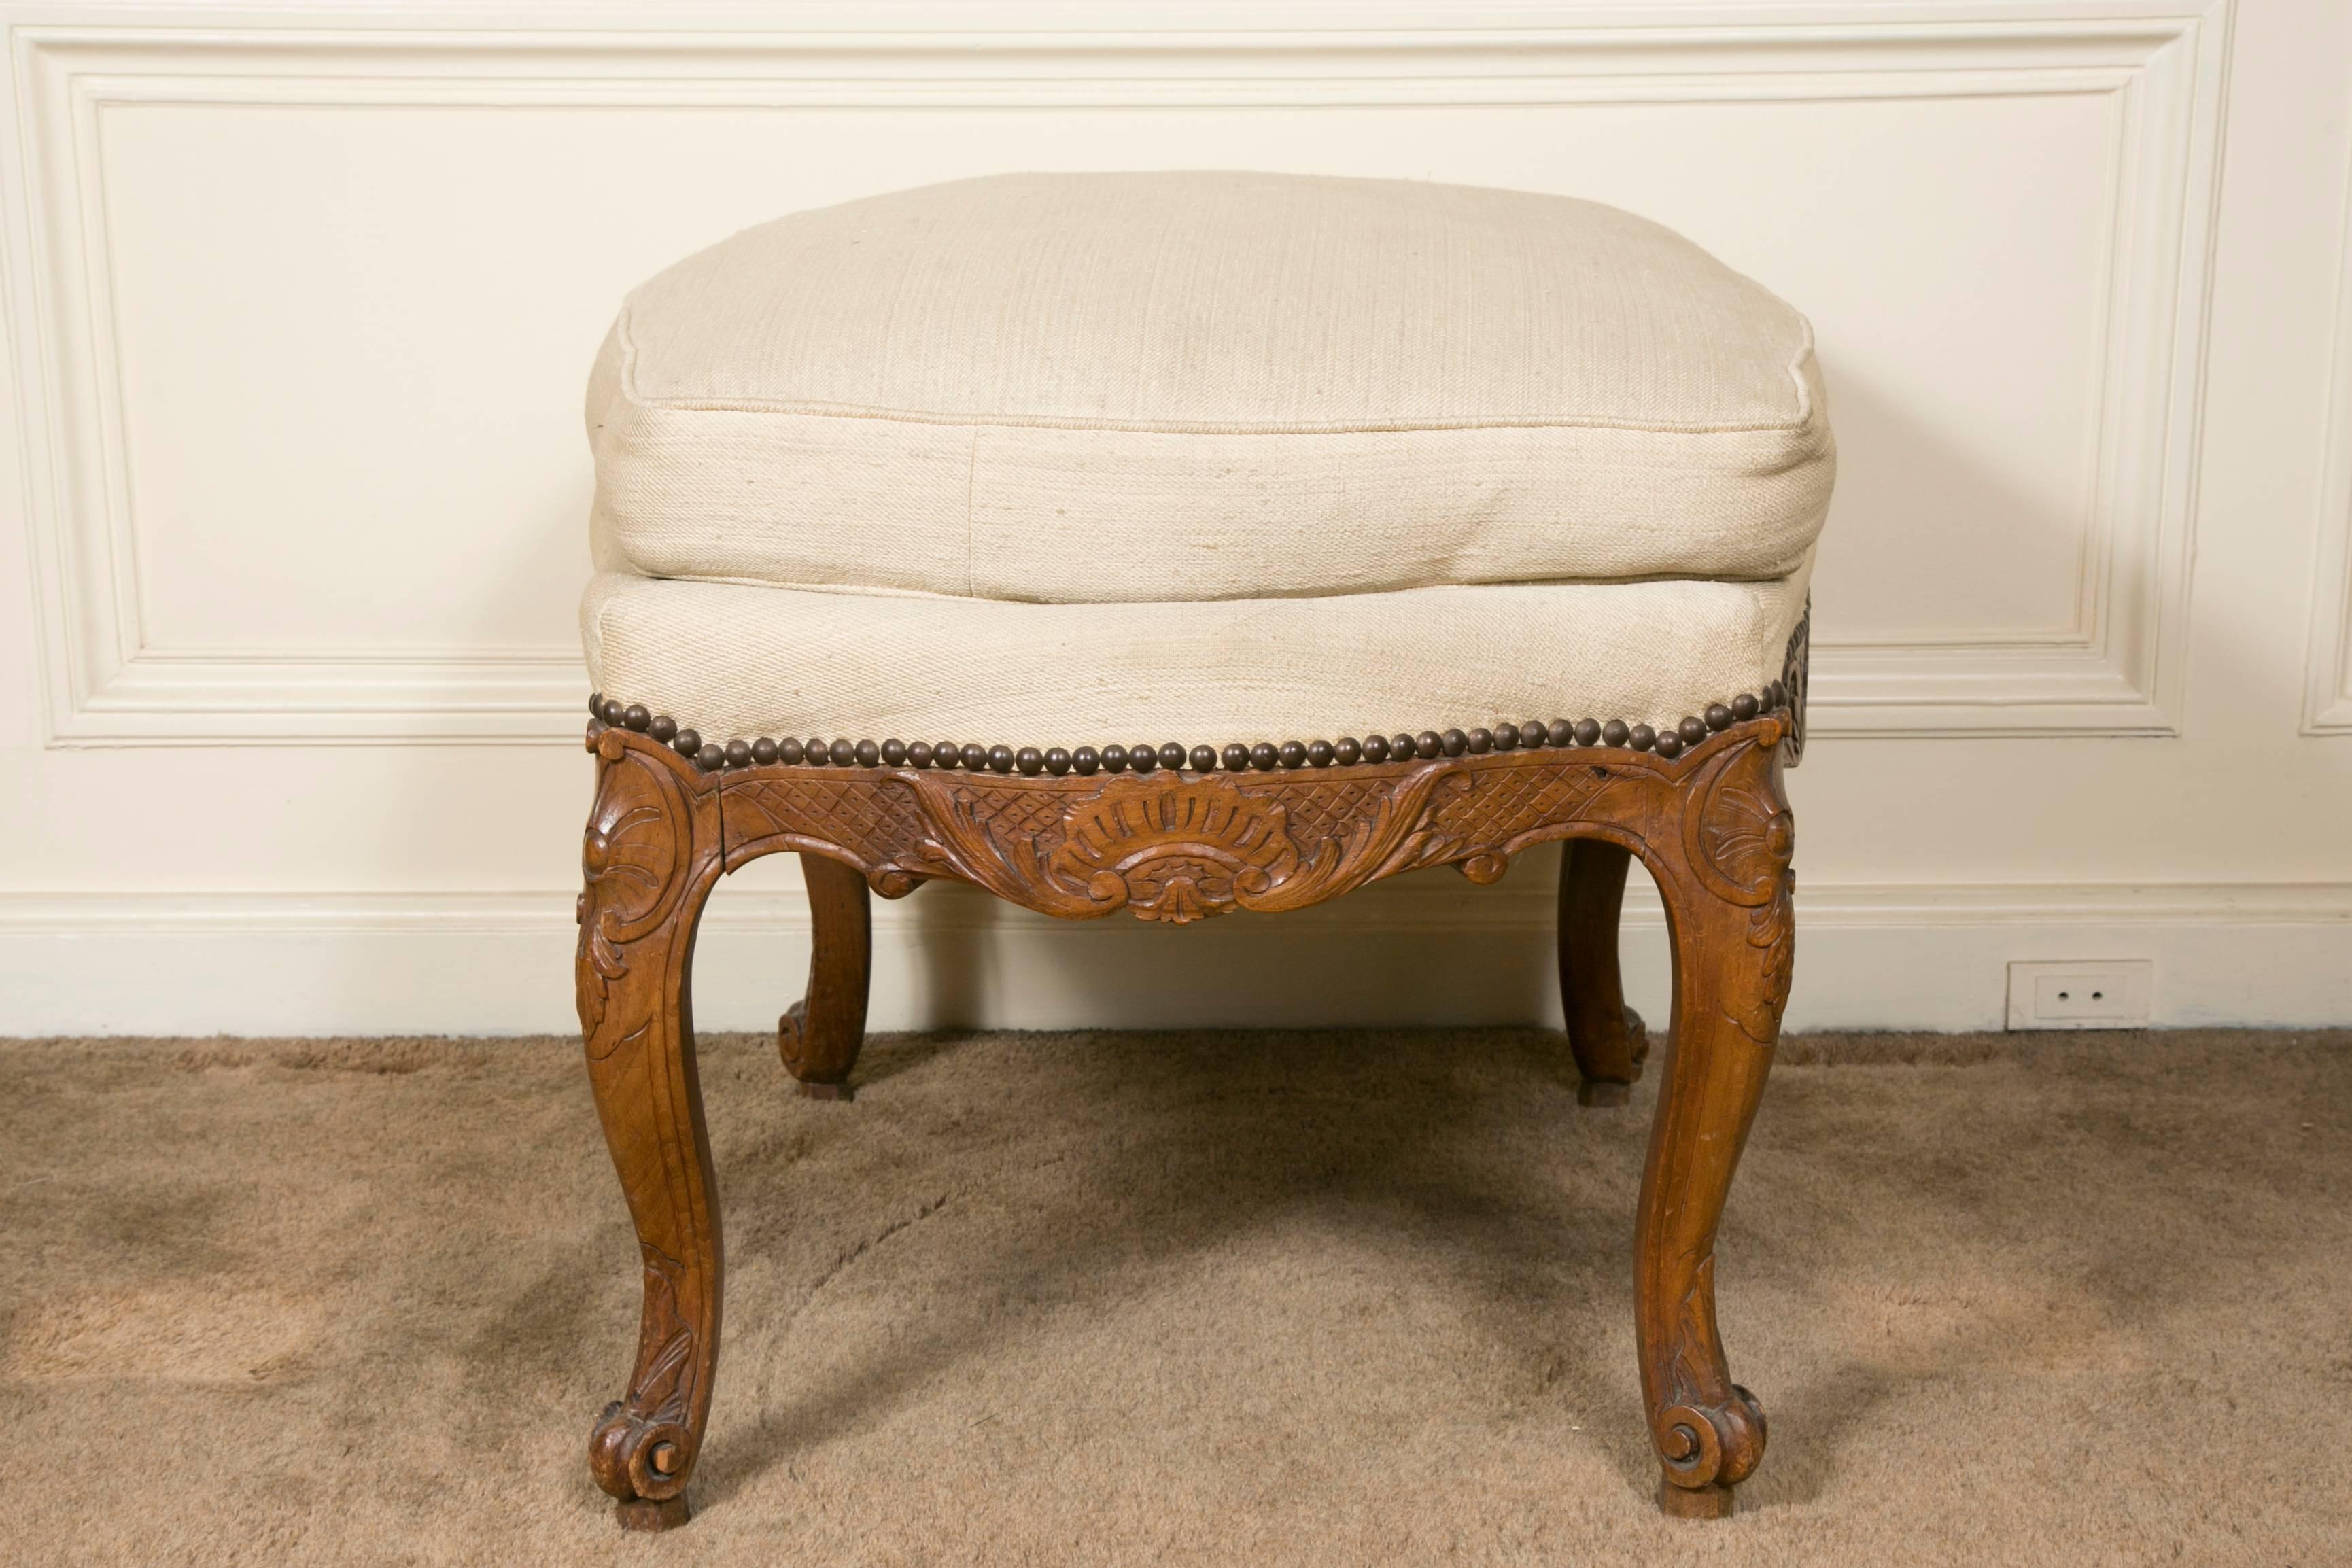 Carved 19th Century French Regence Style Wood Stool with Cushion